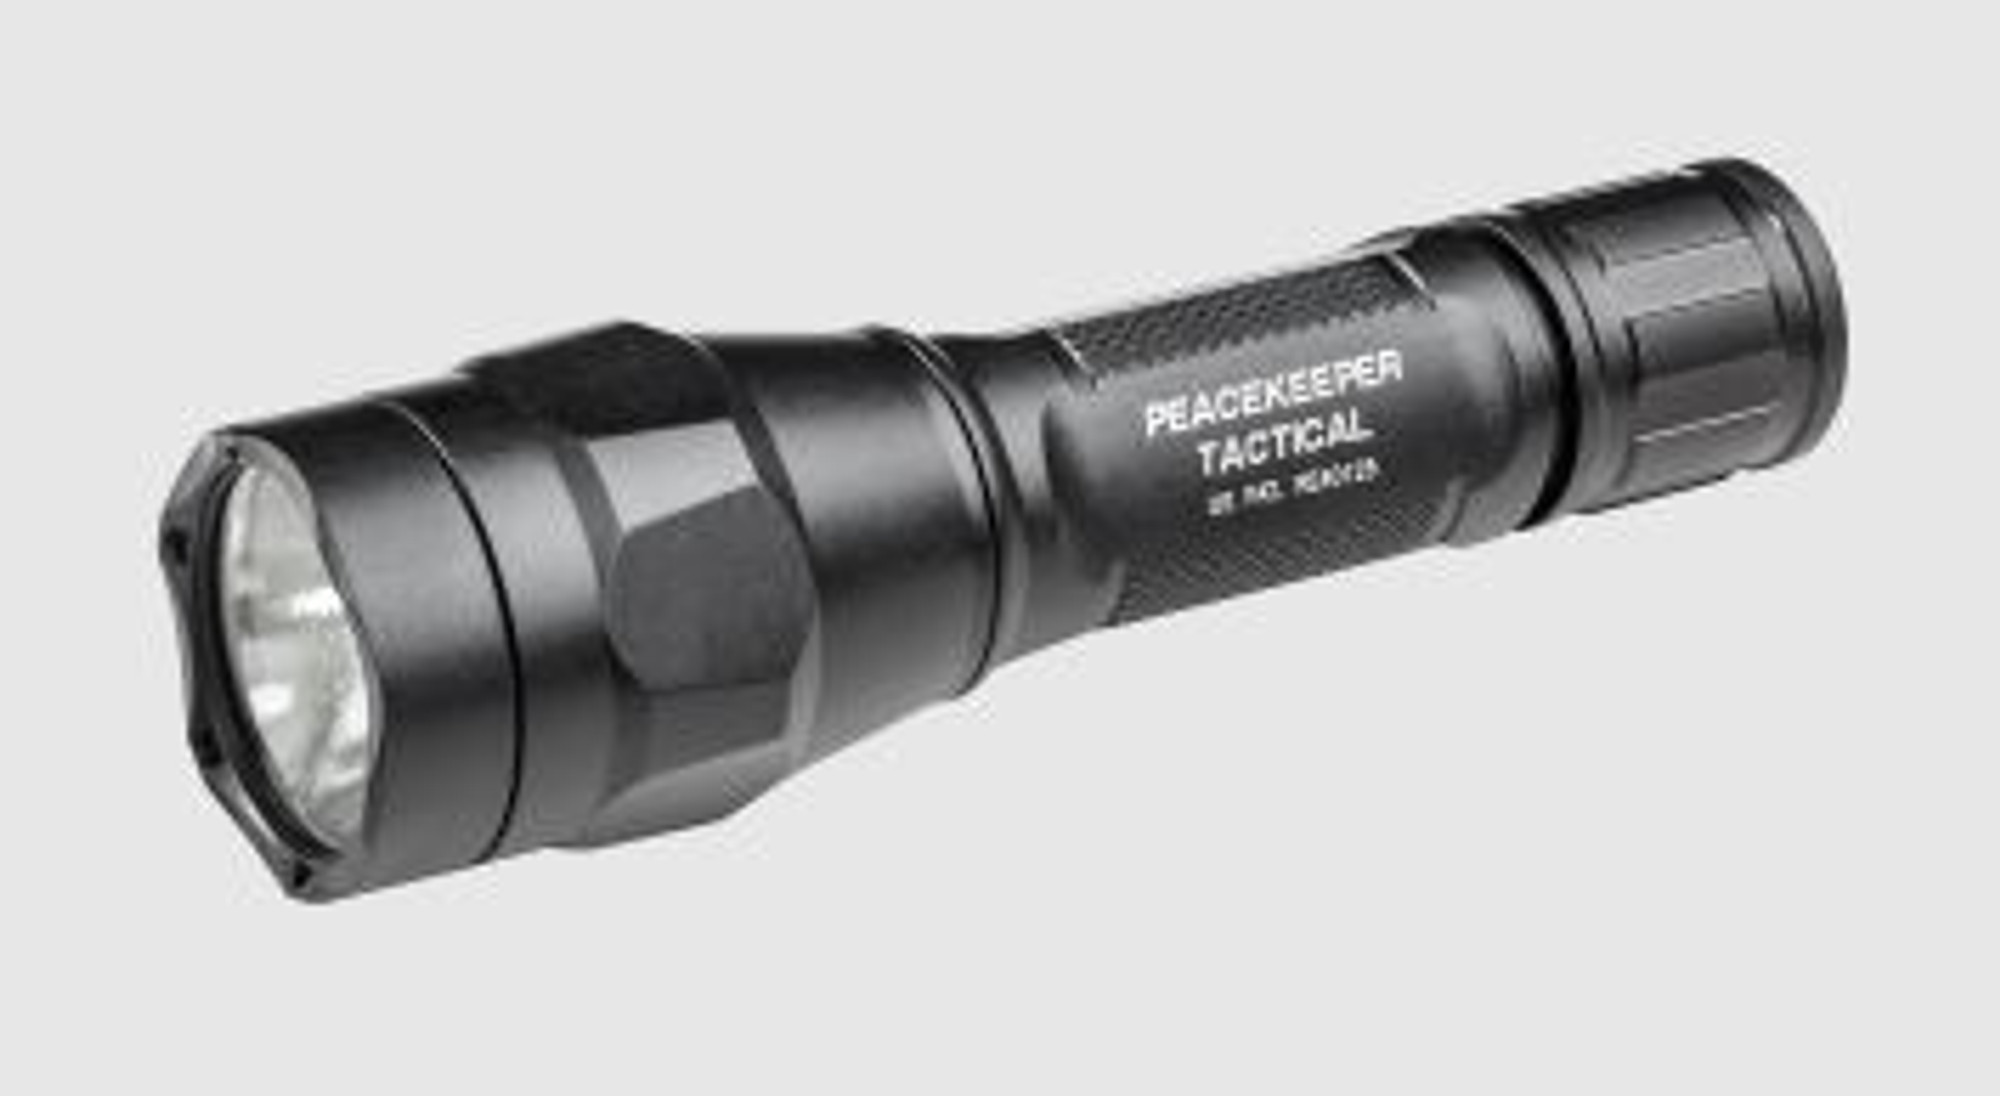 Surefire P1RA Peacekeeper Tactical w/18650 + Charger- 600 Lumens